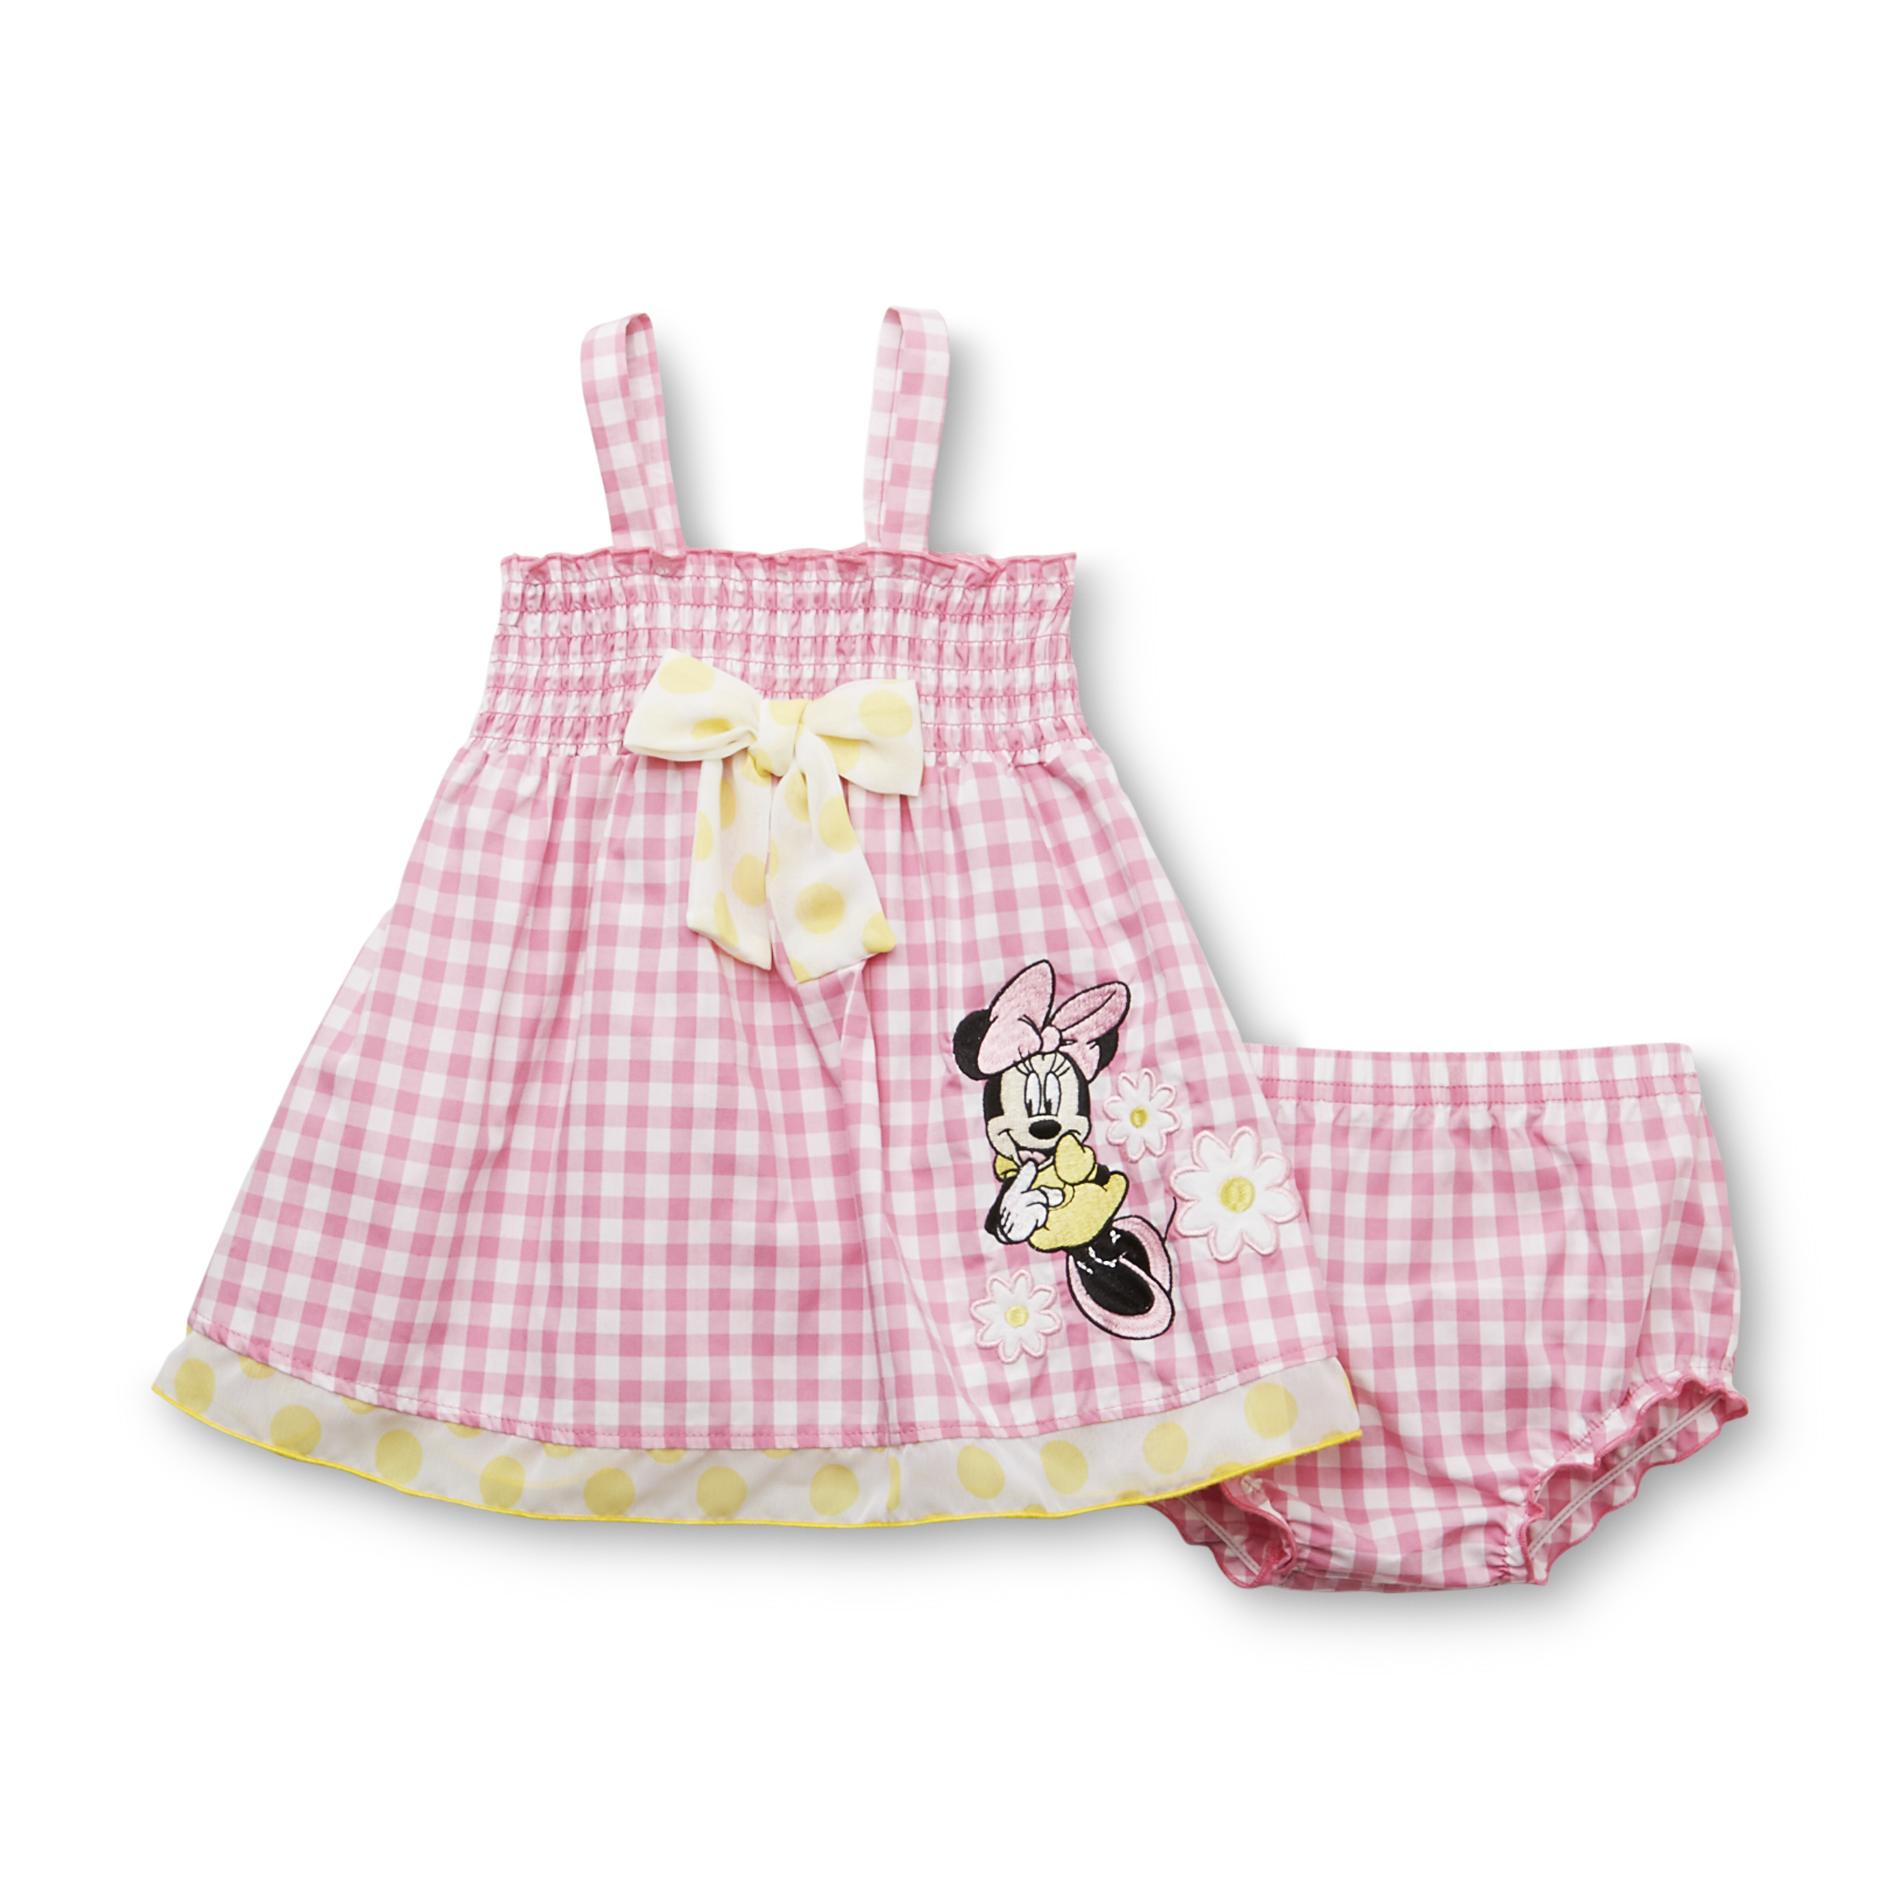 Disney Newborn Girl's Babydoll Top & Diaper Cover - Minnie Mouse